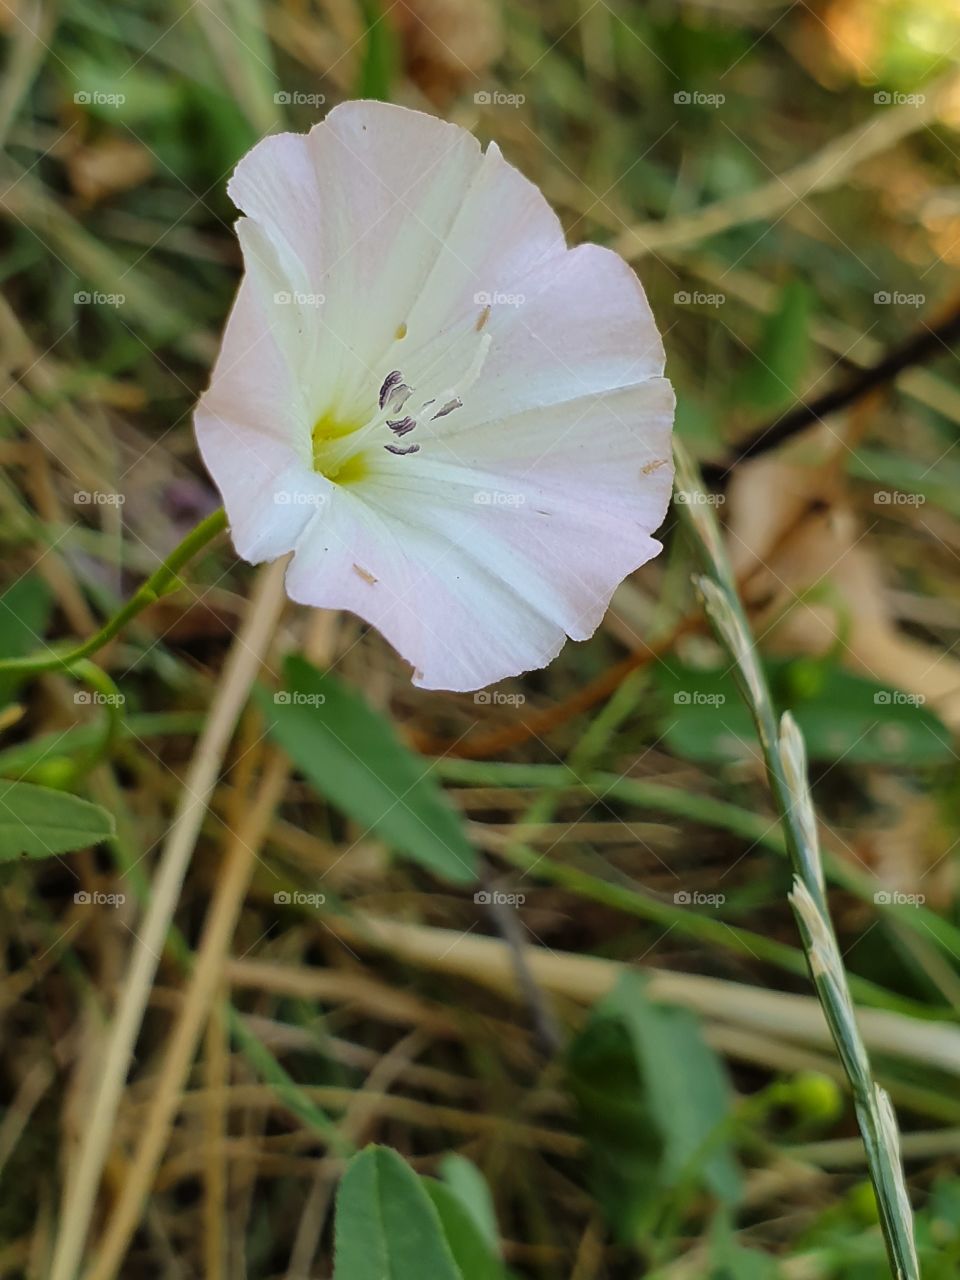 tender white and pink flower with insects